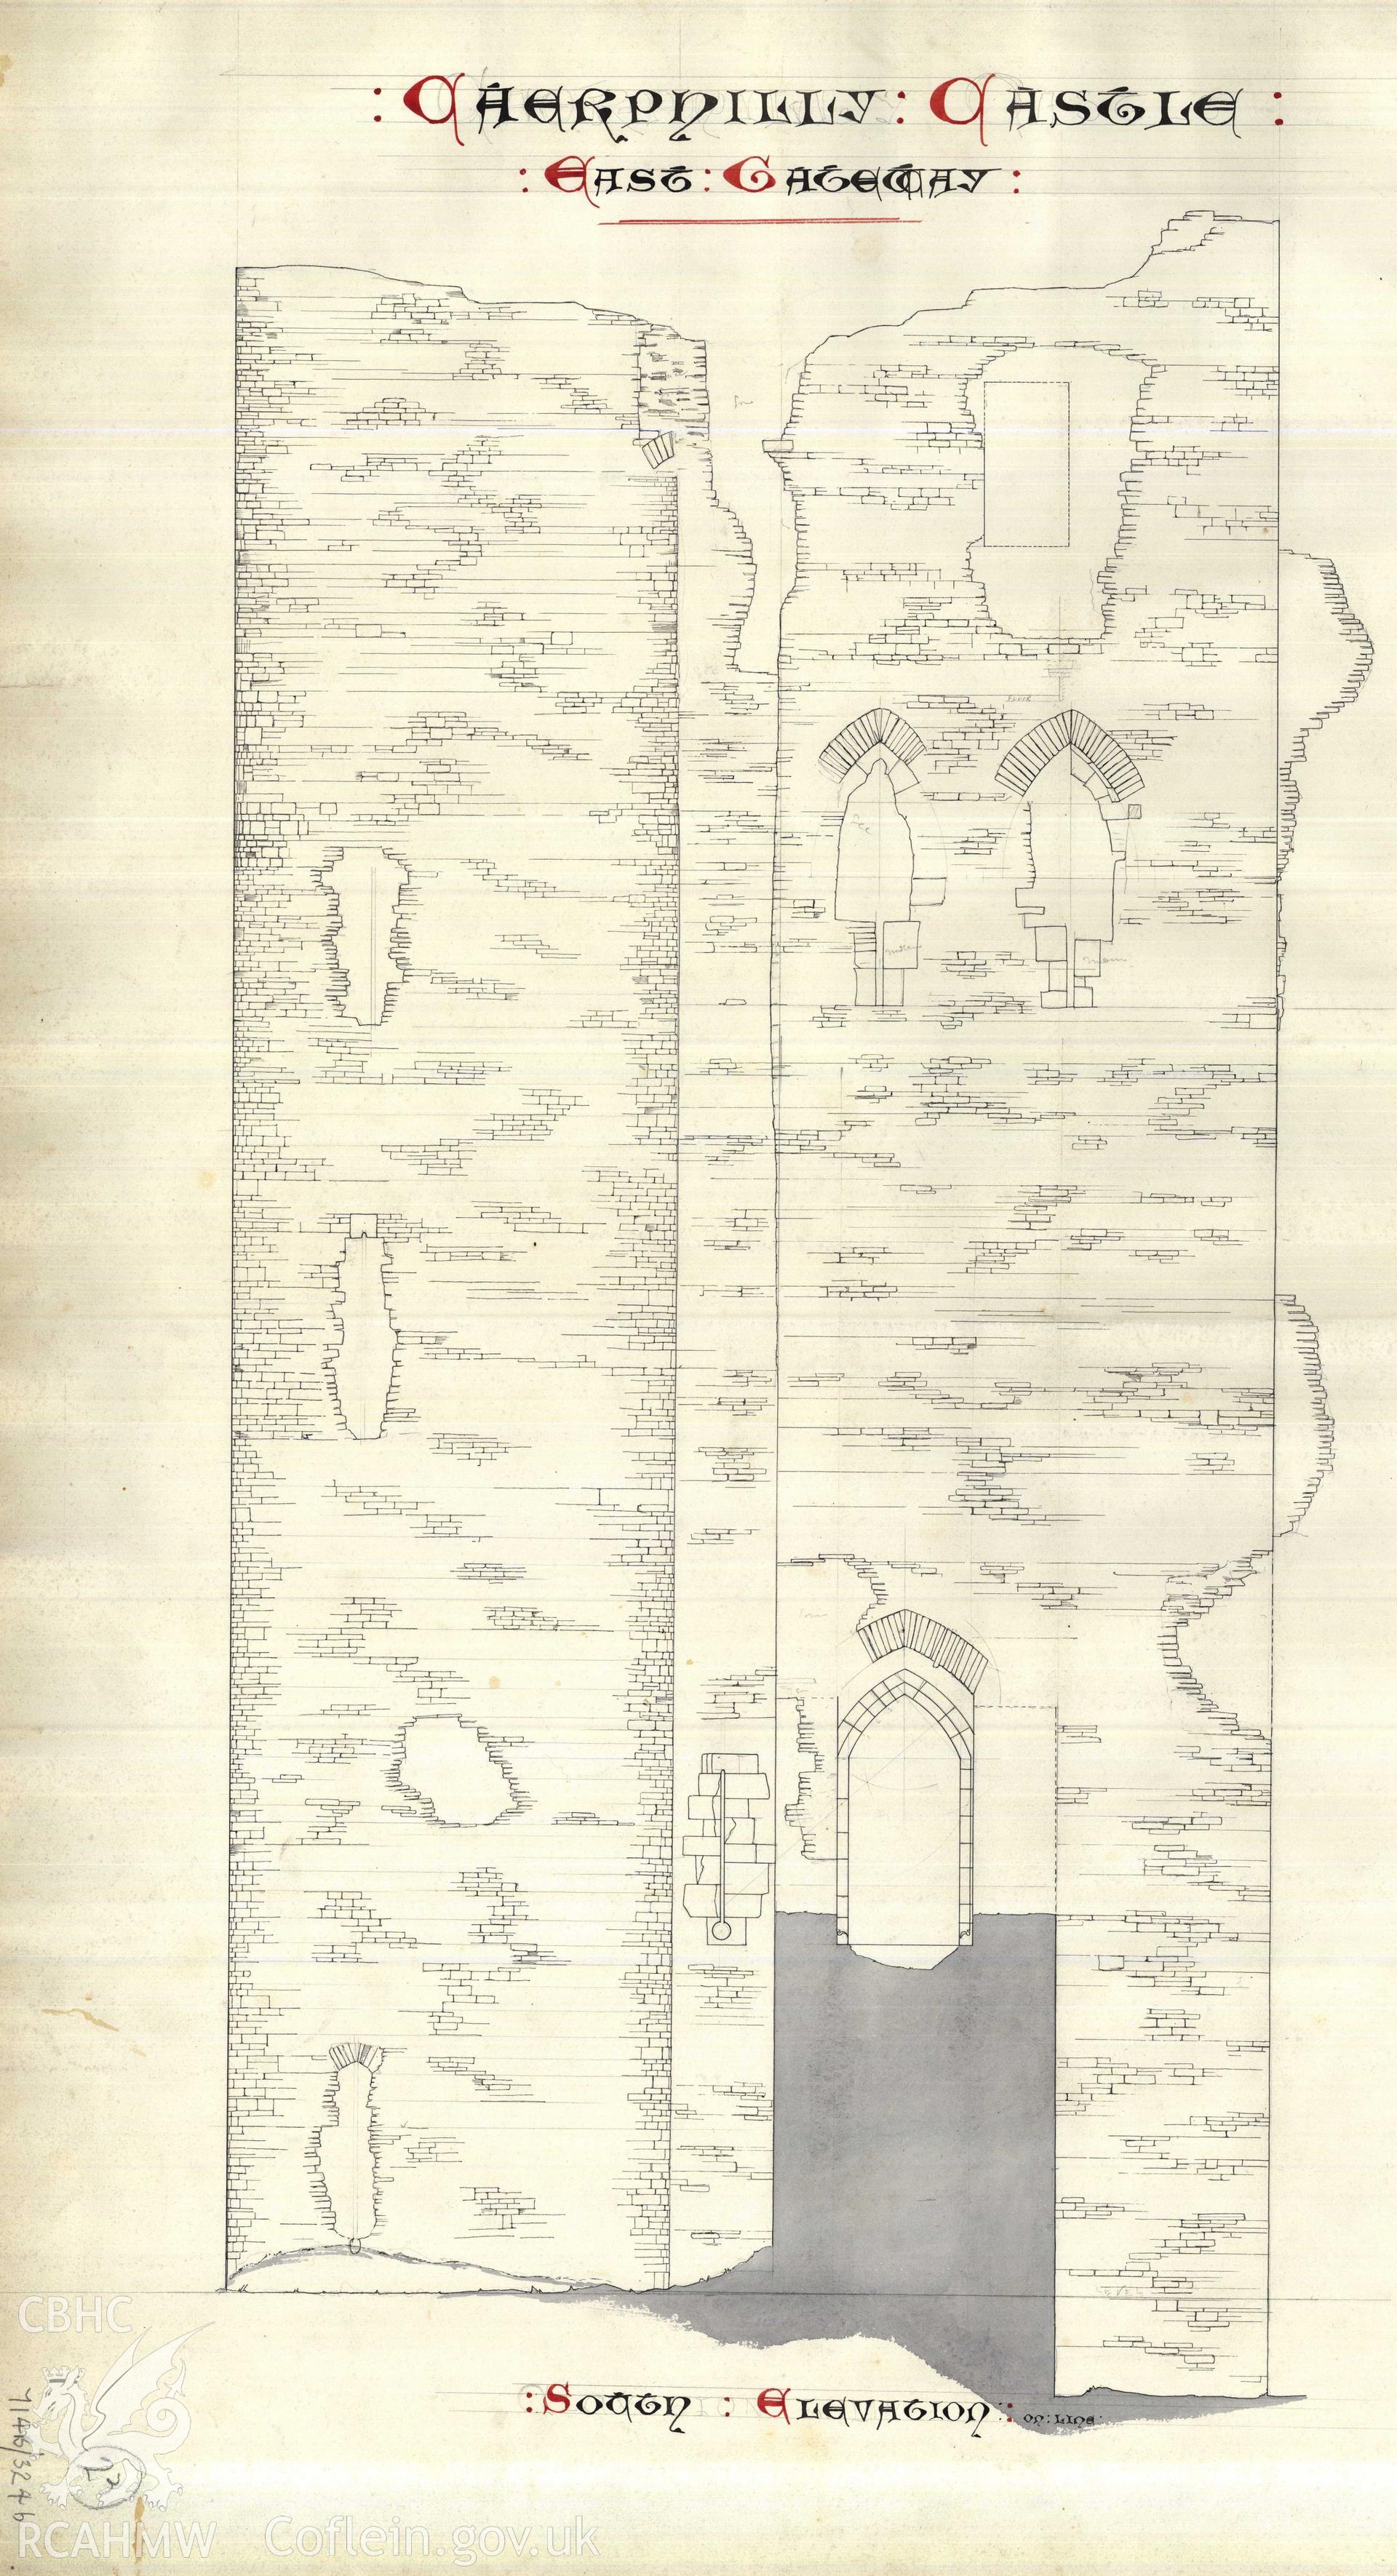 Cadw guardianship monument drawing of Caerphilly Castle. South elevations, East gateway. Cadw Ref. No. 714B/324b. No scale.